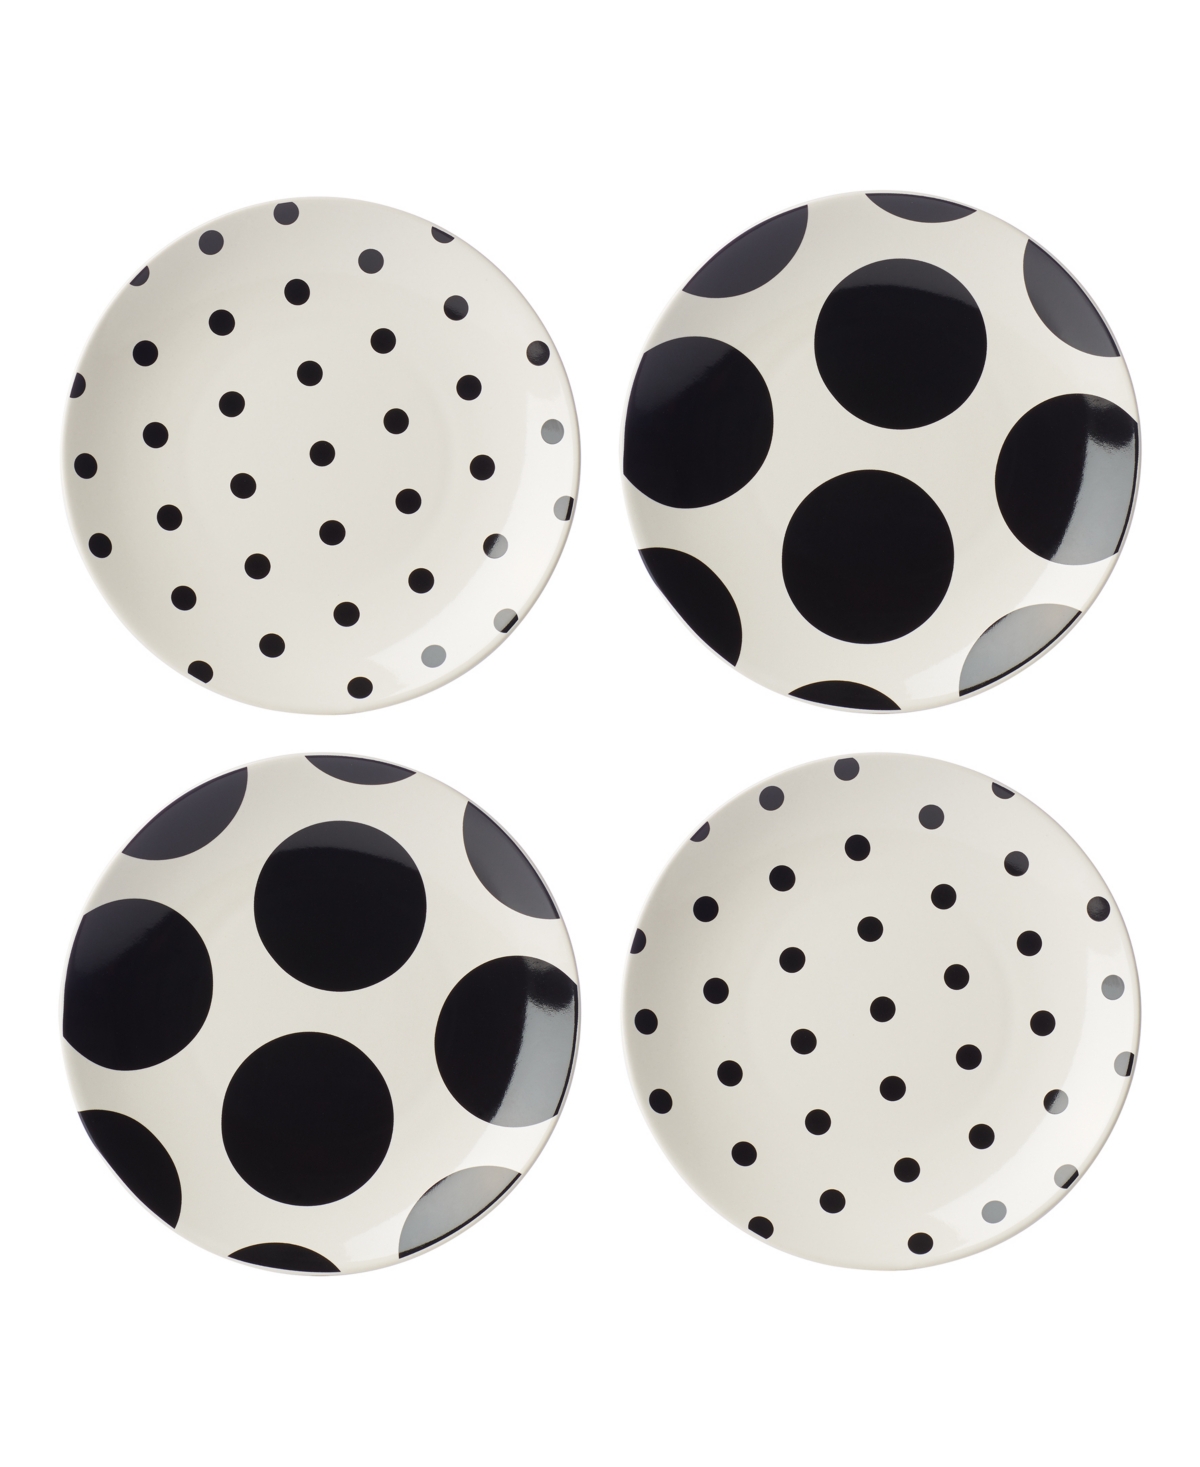 on the Dot Assorted Tidbit Plates 4 Piece Set, Service for 4 - White